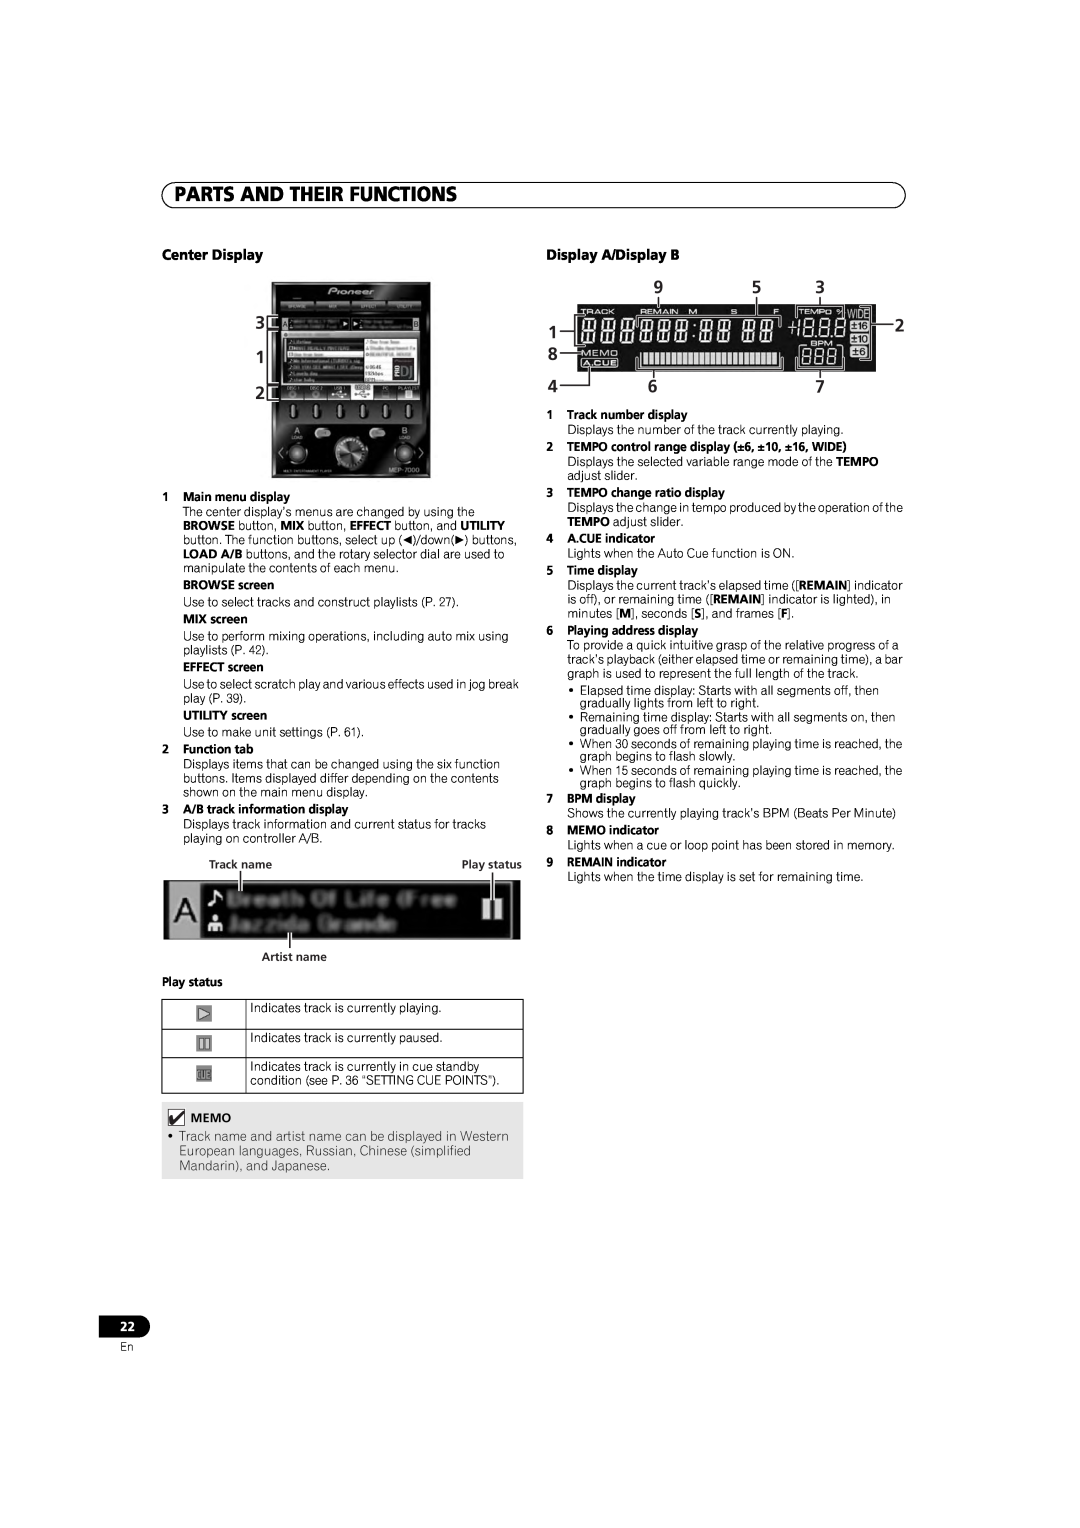 Pioneer MEP-7000 operating instructions Display A/Display B, Parts And Their Functions, Center Display 